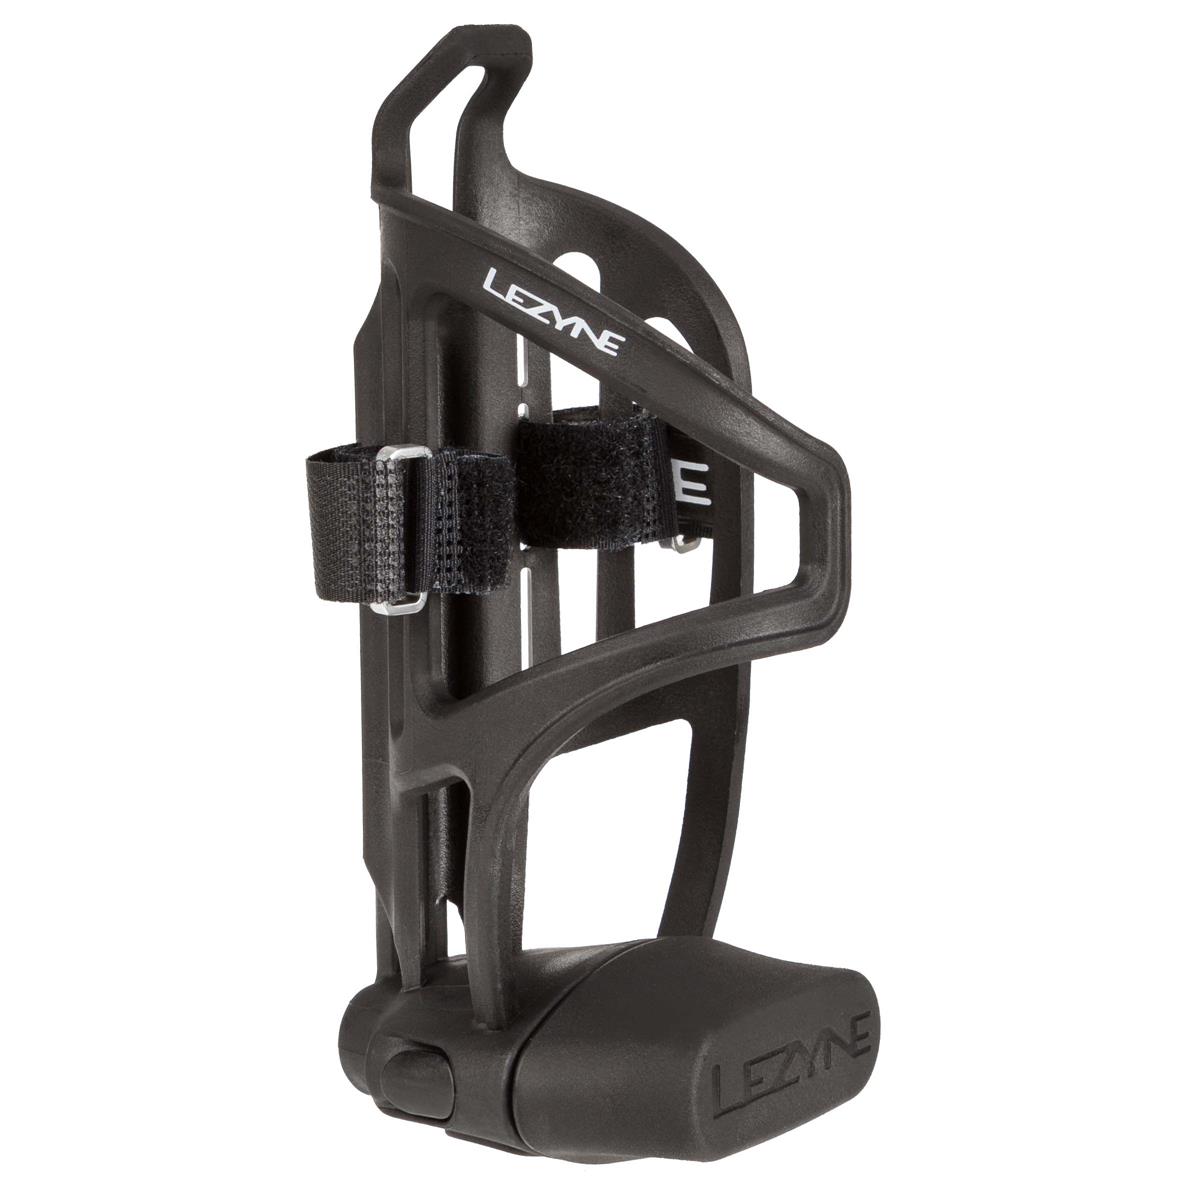 lezyne bottle cages